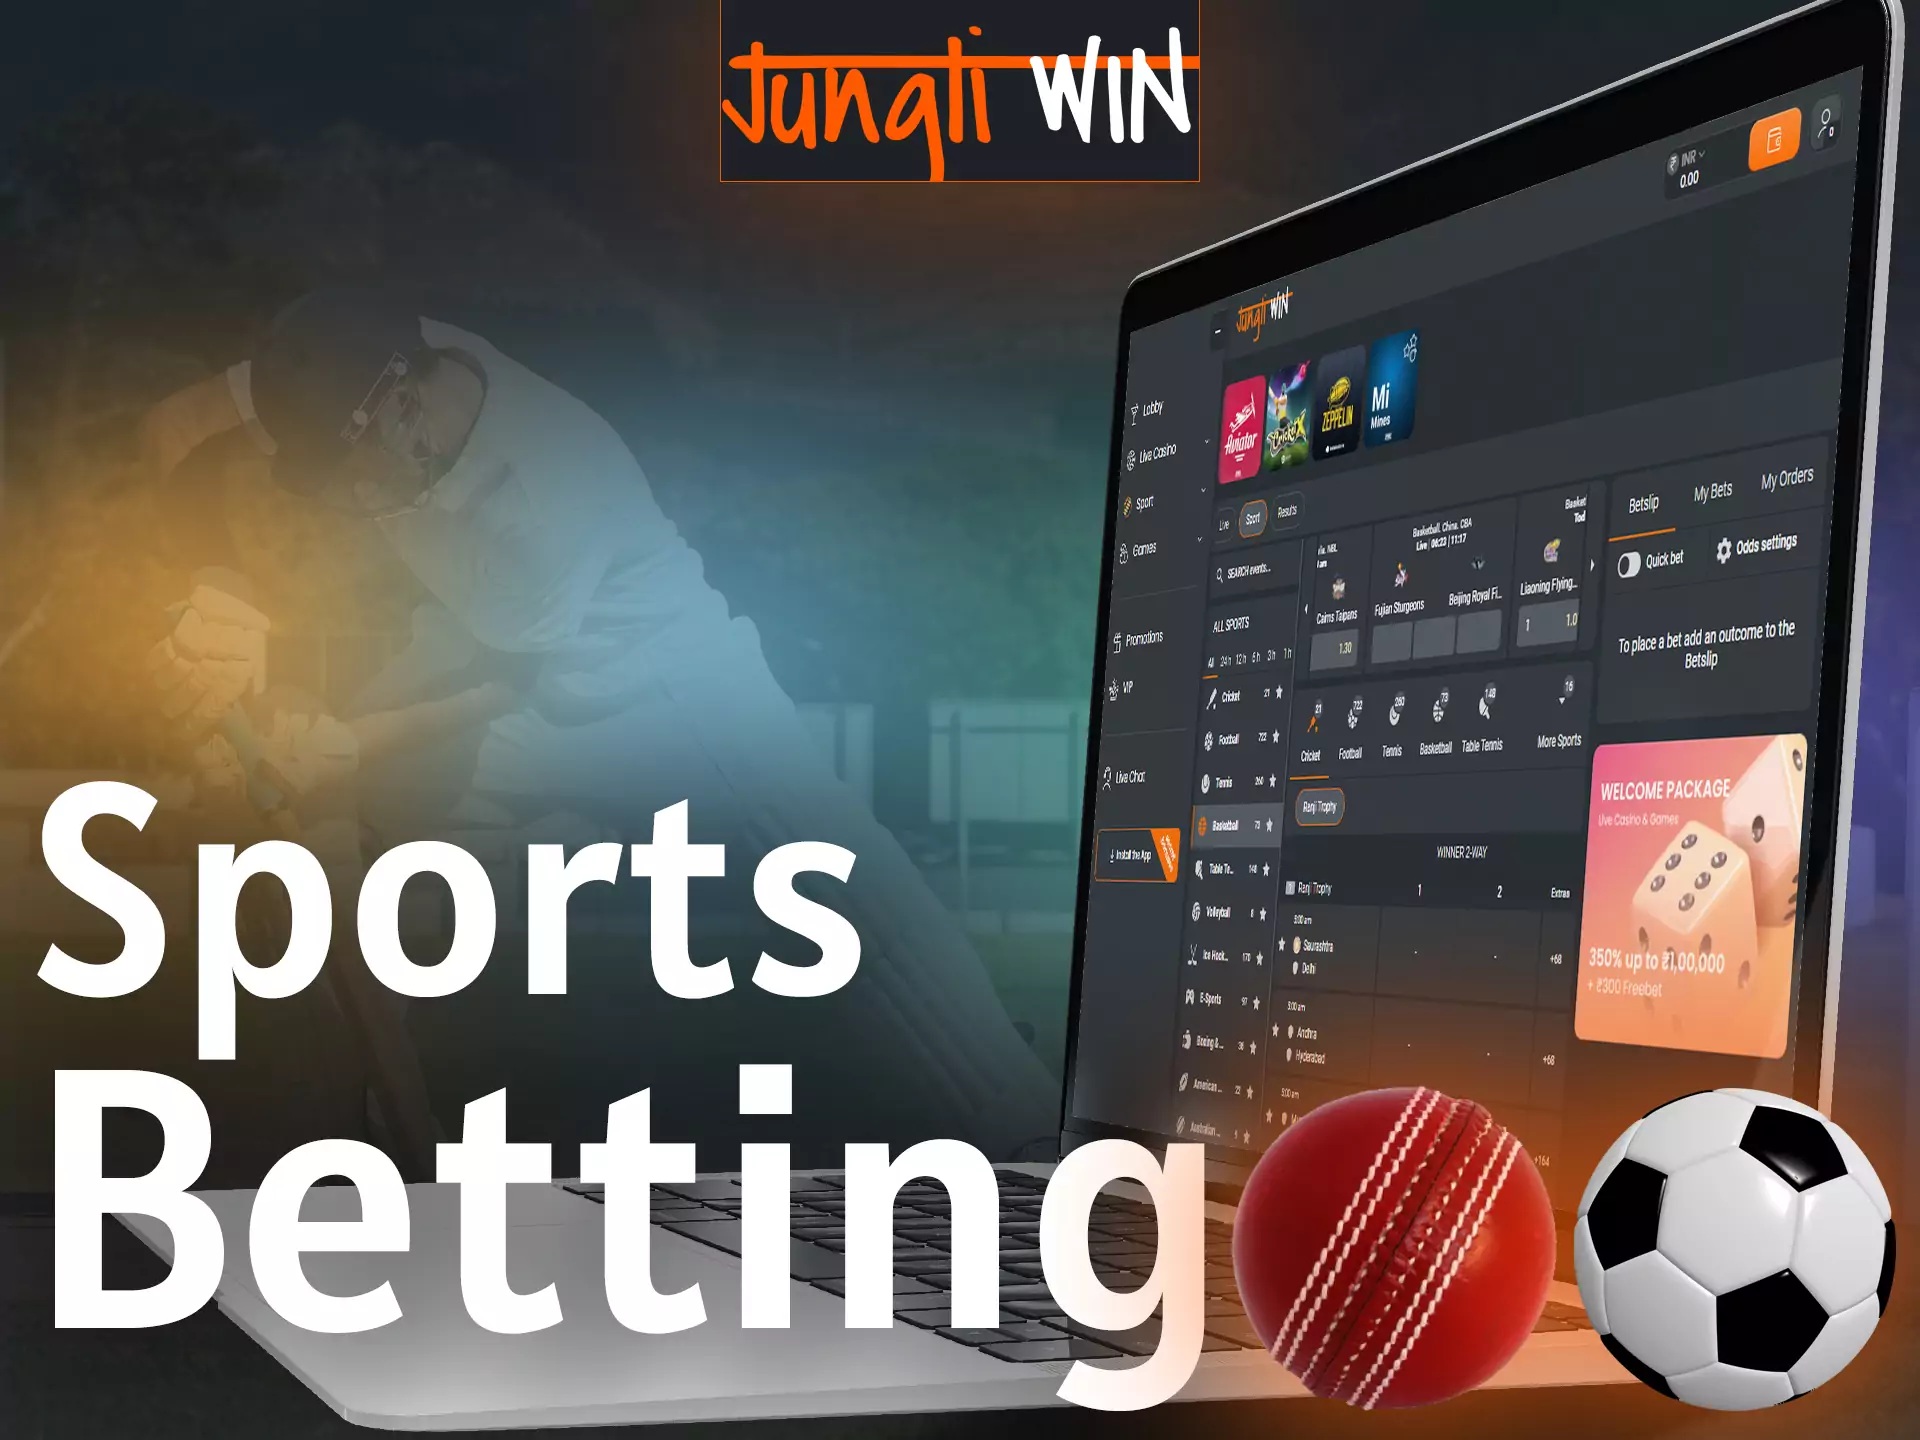 Jungliwin gives you the opportunity to bet on various sports events.